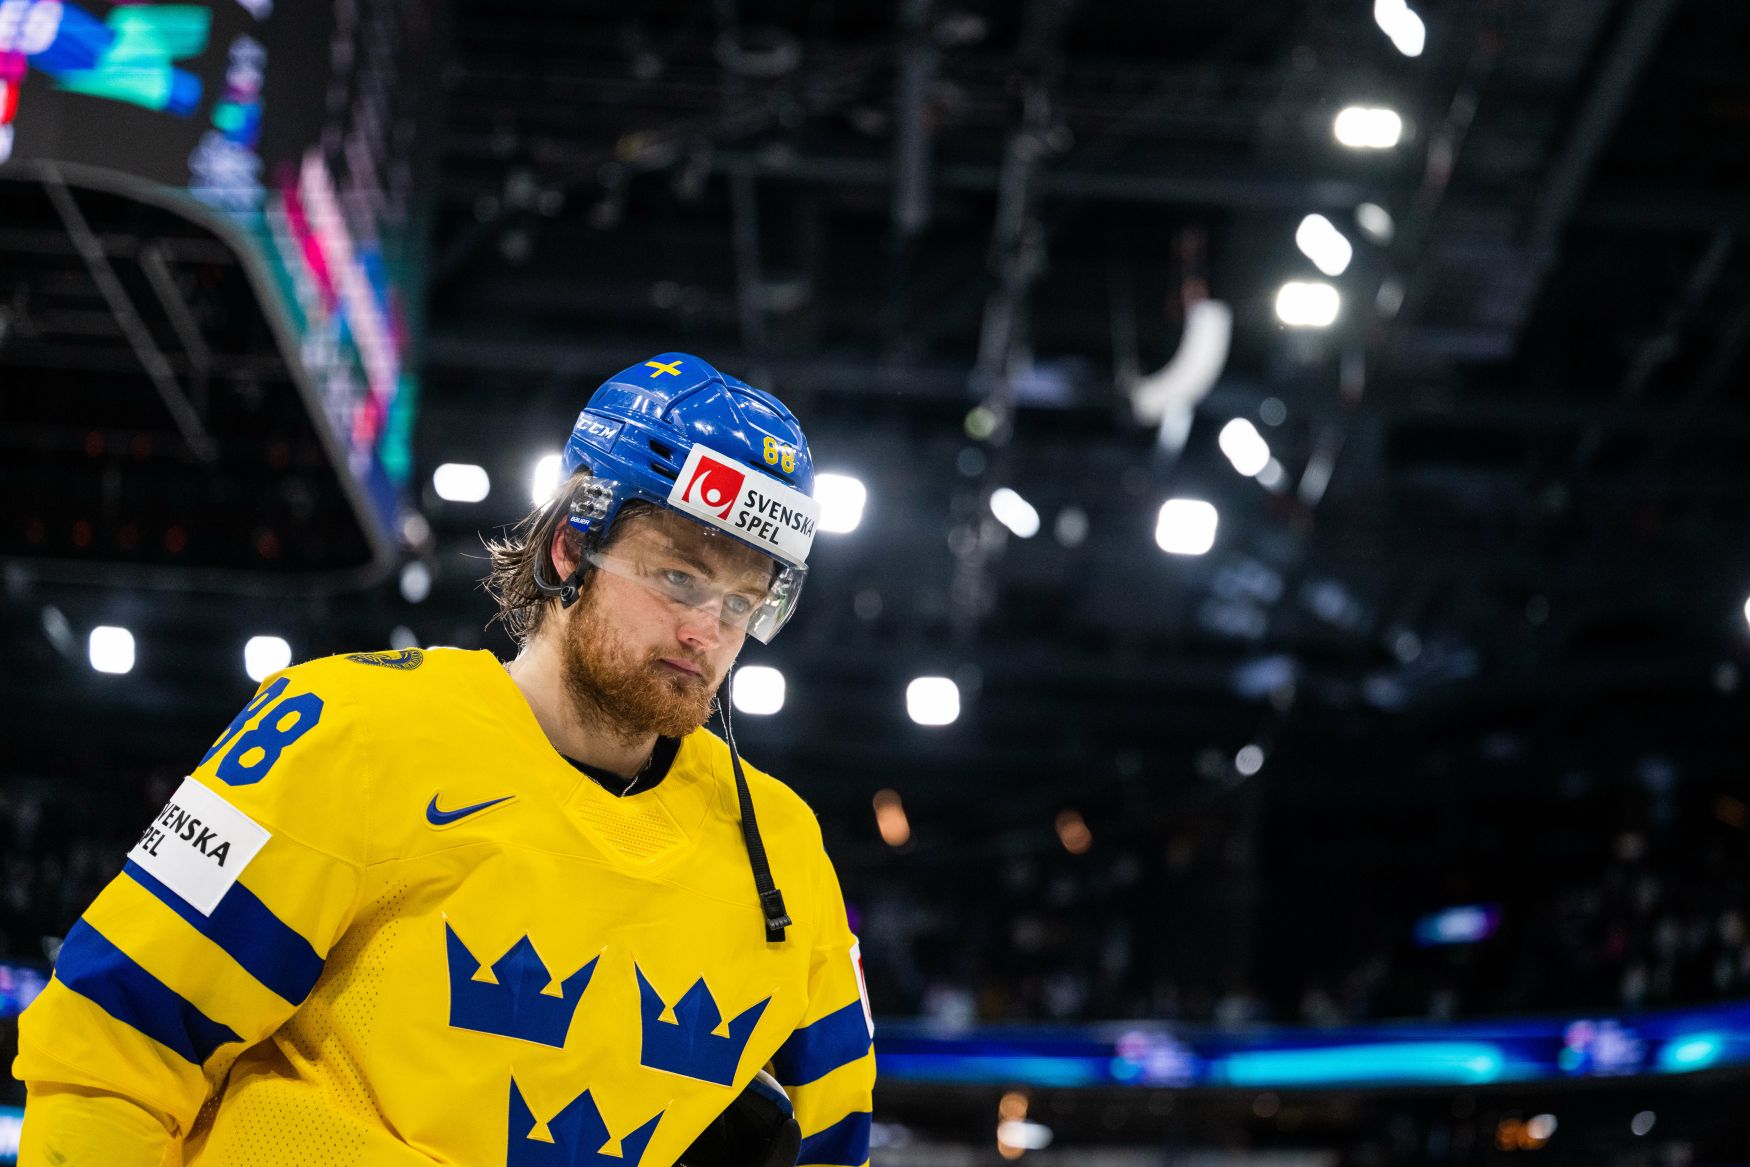 World class, they sing Nylander on TV.  Then the strengthening of the Swedish star failed